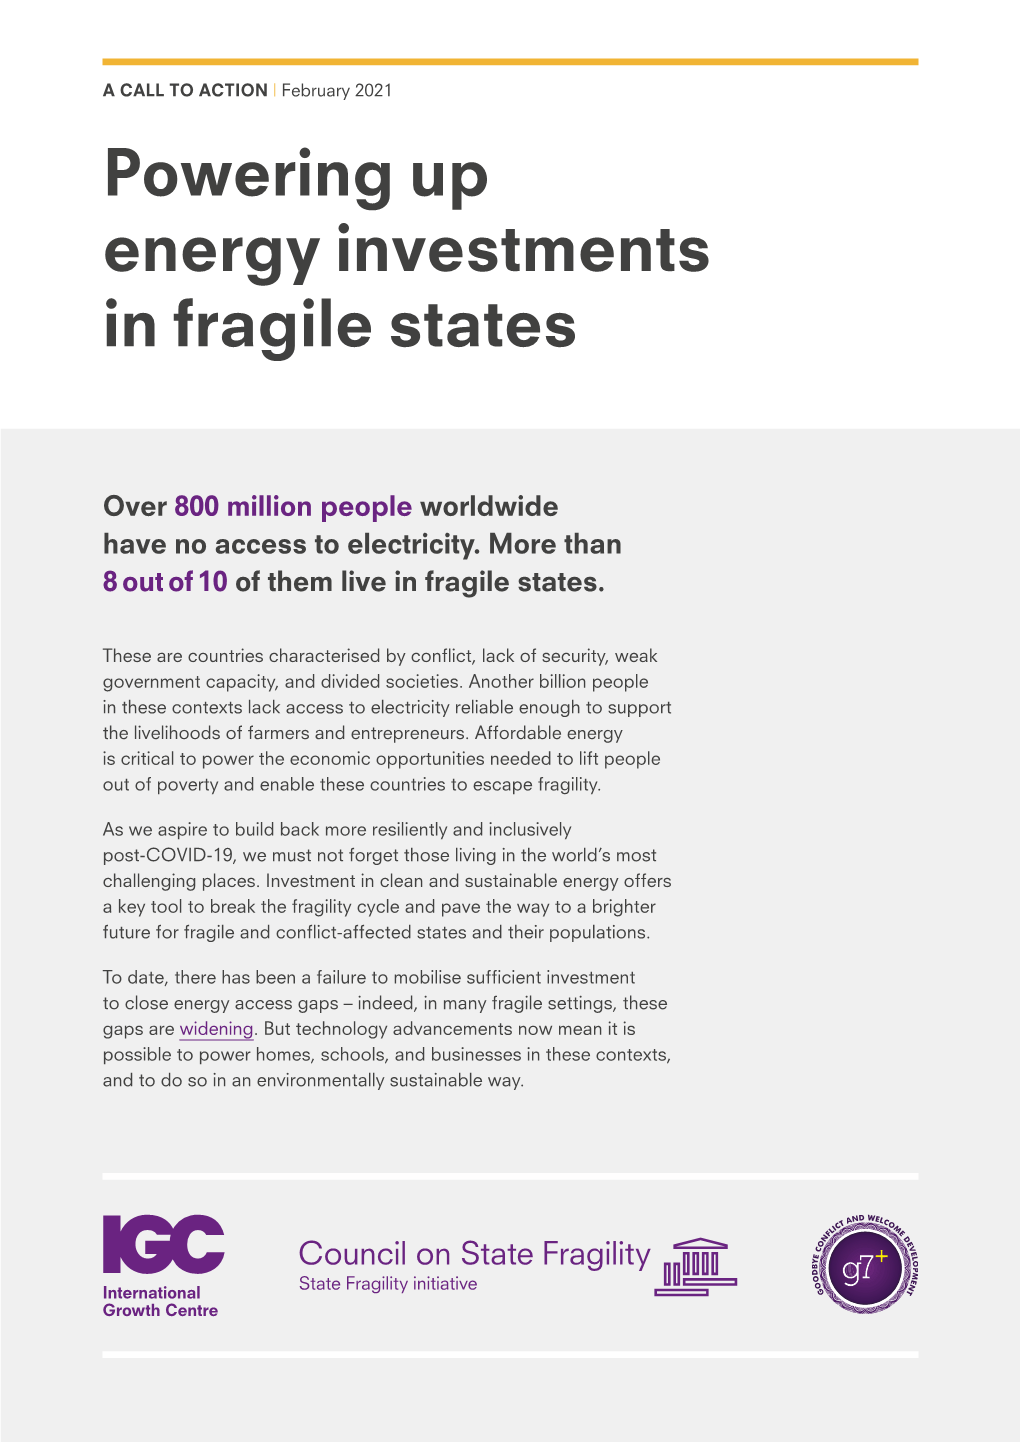 Powering up Energy Investments in Fragile States